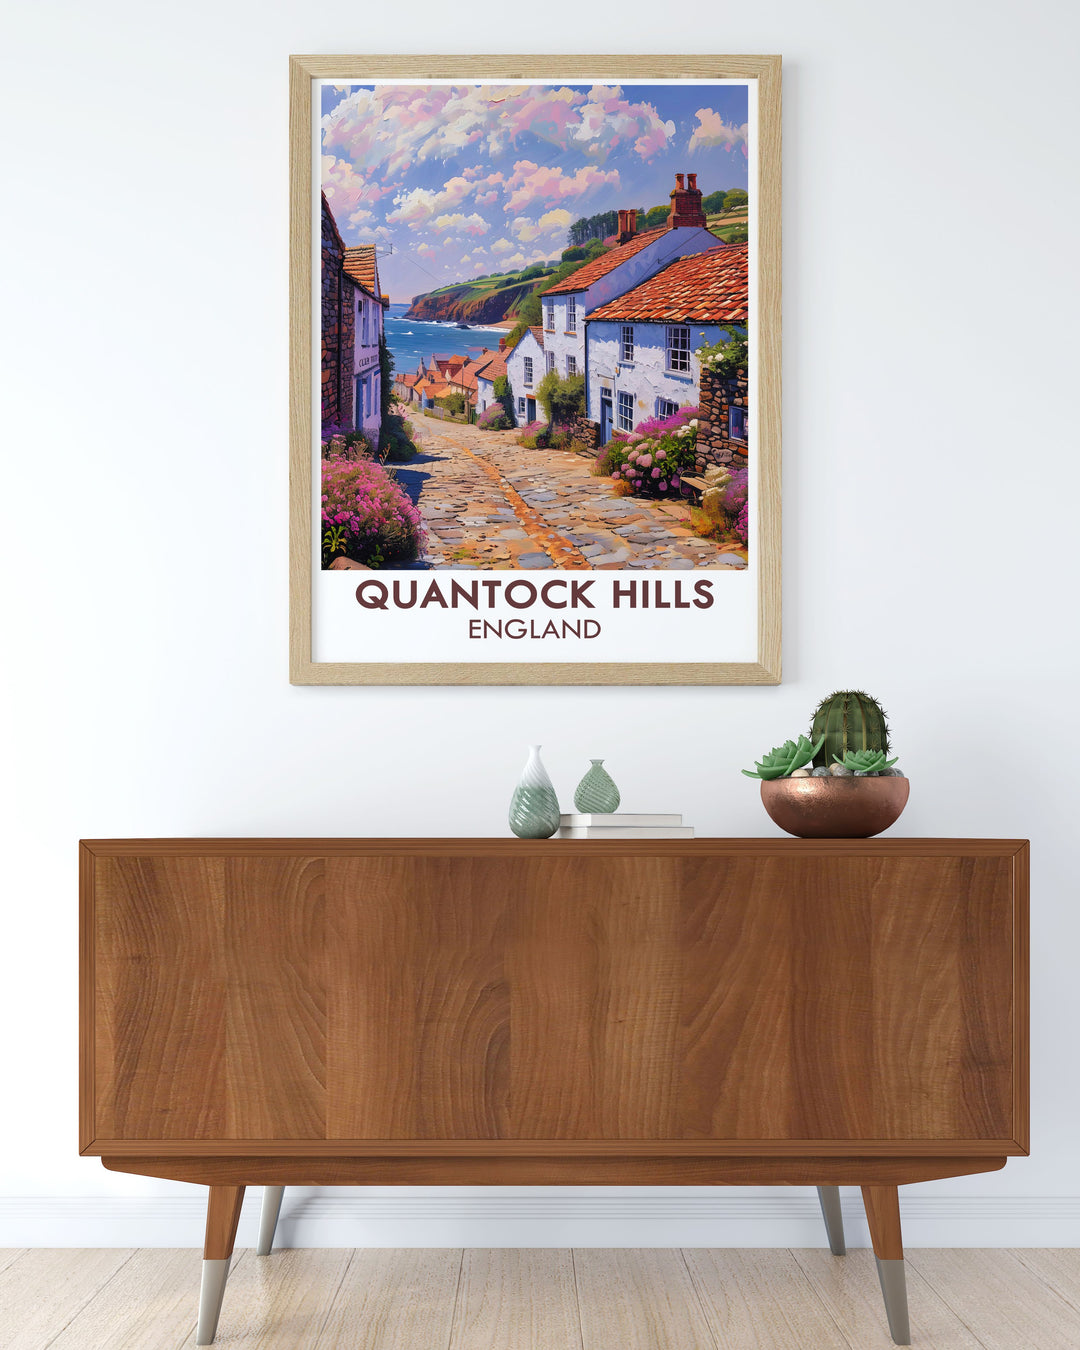 Nether Stowey artwork illustrating the stunning views of Quantock Hills and Somerset AONB a beautiful and elegant travel poster print that enhances any room with its vibrant colors and intricate details of Vale Taunton Deane and Quantock Heath.